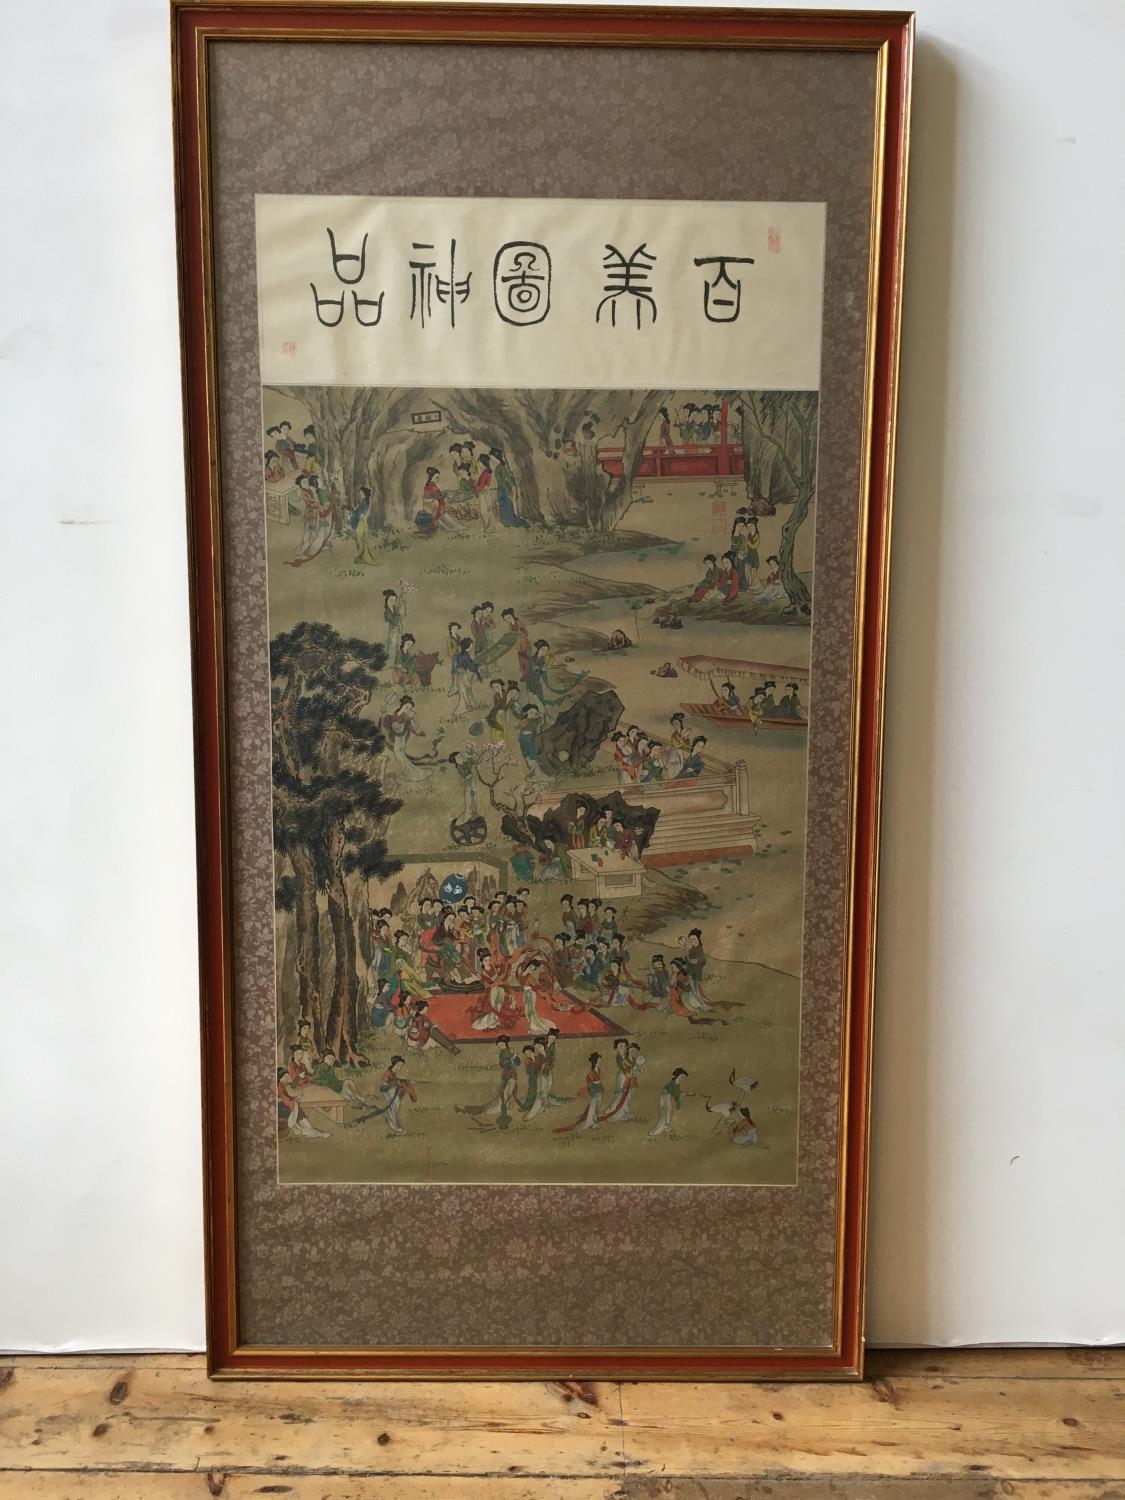 LARGE FRAMED LITHOGRAPH DEPICTING CHINESE EMPRESS AND ATTENDANTS ENGAGED IN VARIOUS PURSUITS